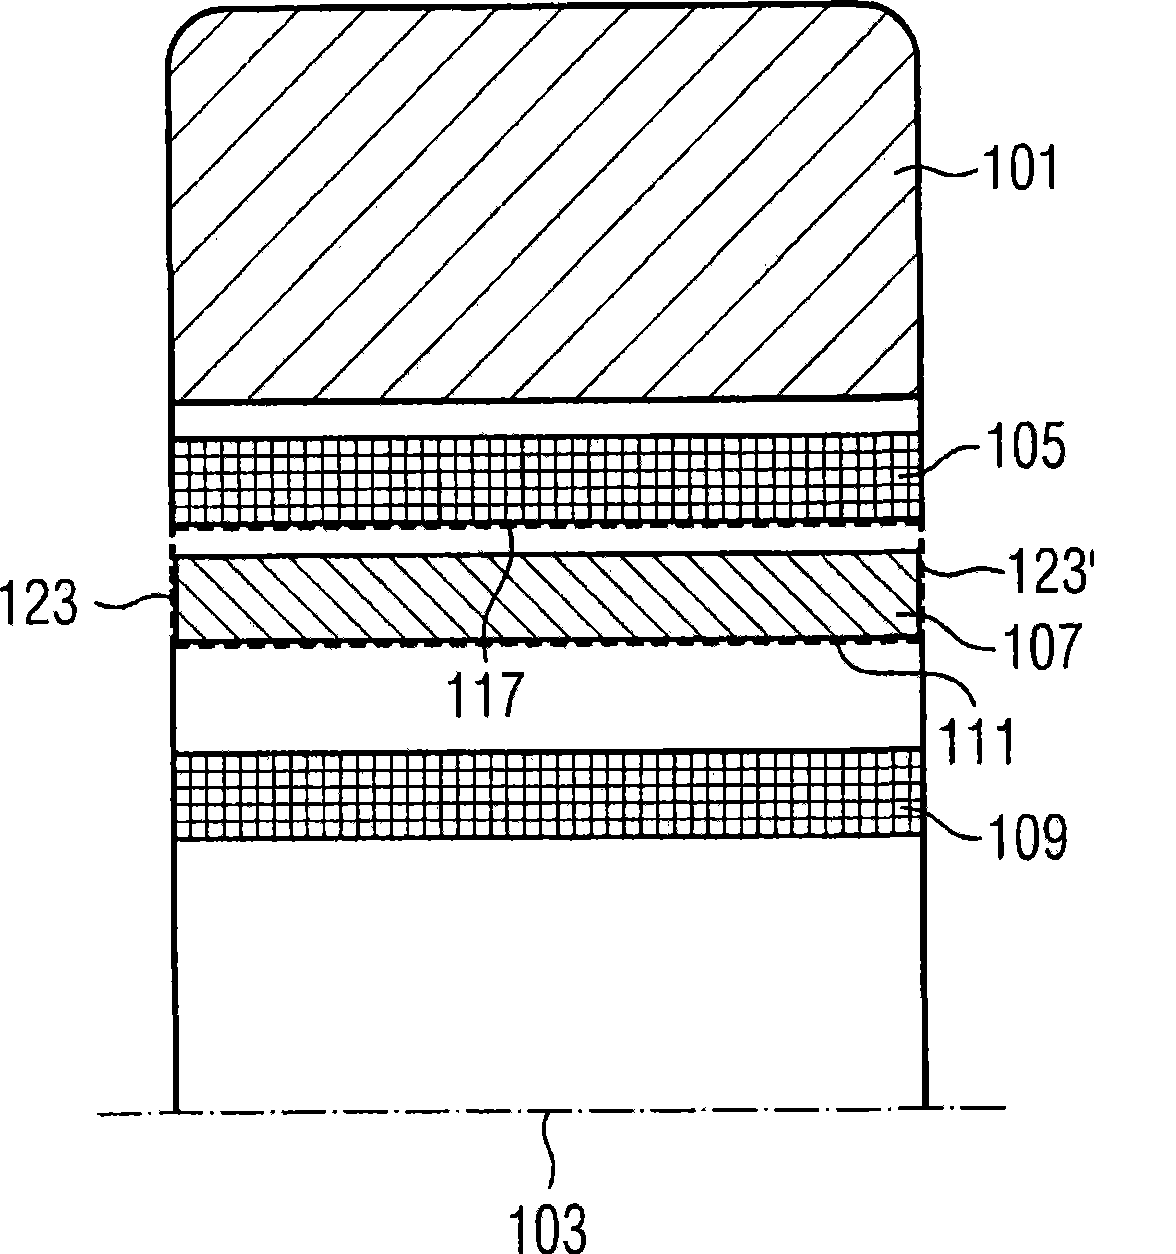 Device for superposed magnetic resonance and positron emission tomography imaging